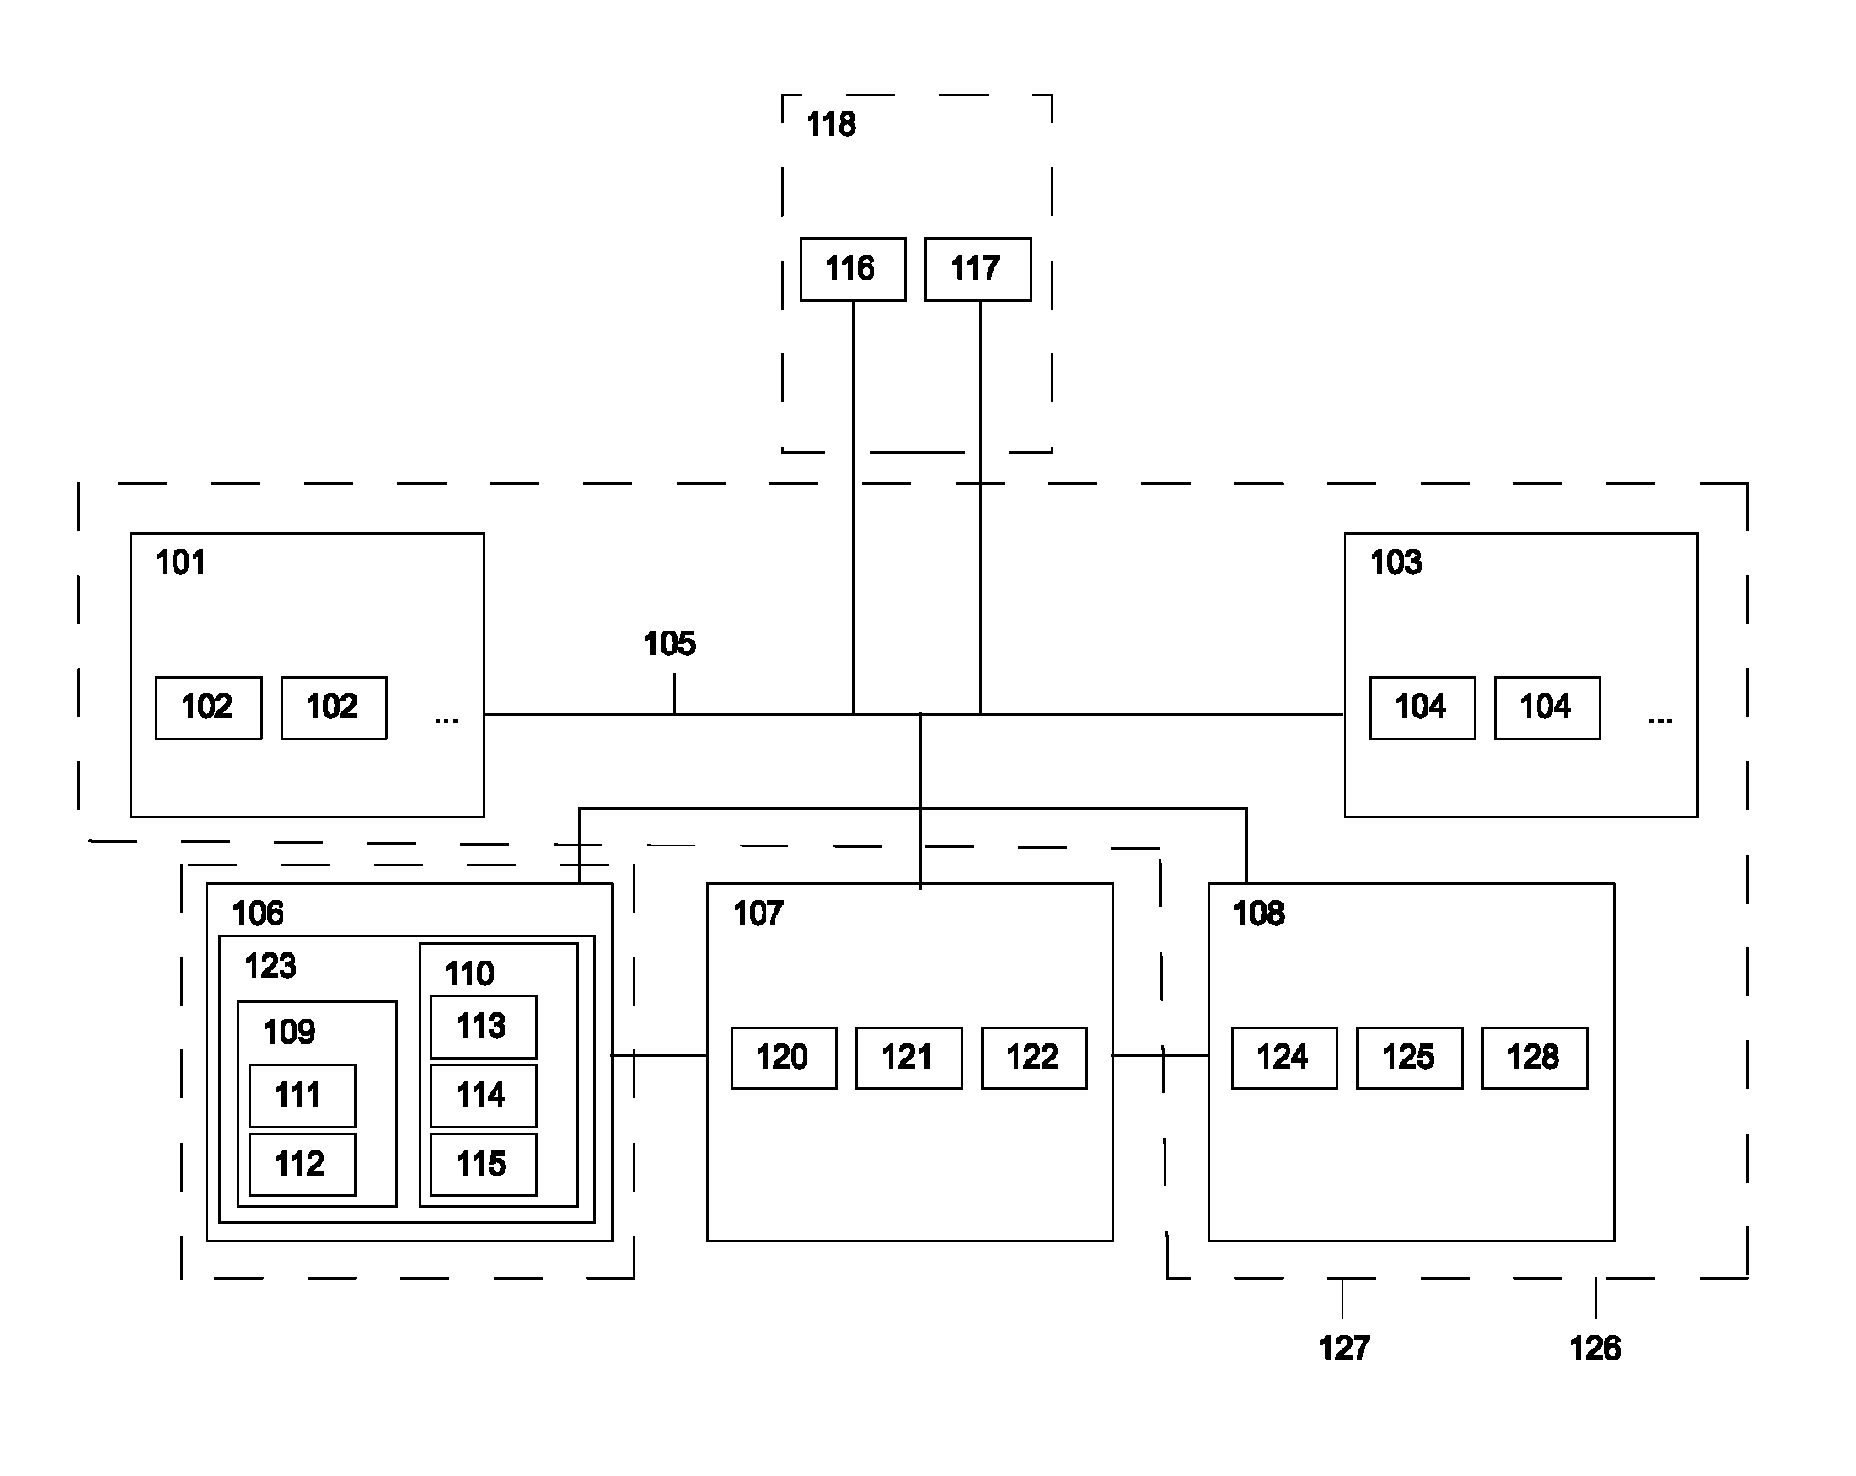 Methods and apparatus for increasing the efficiency of electronic data storage and transmission